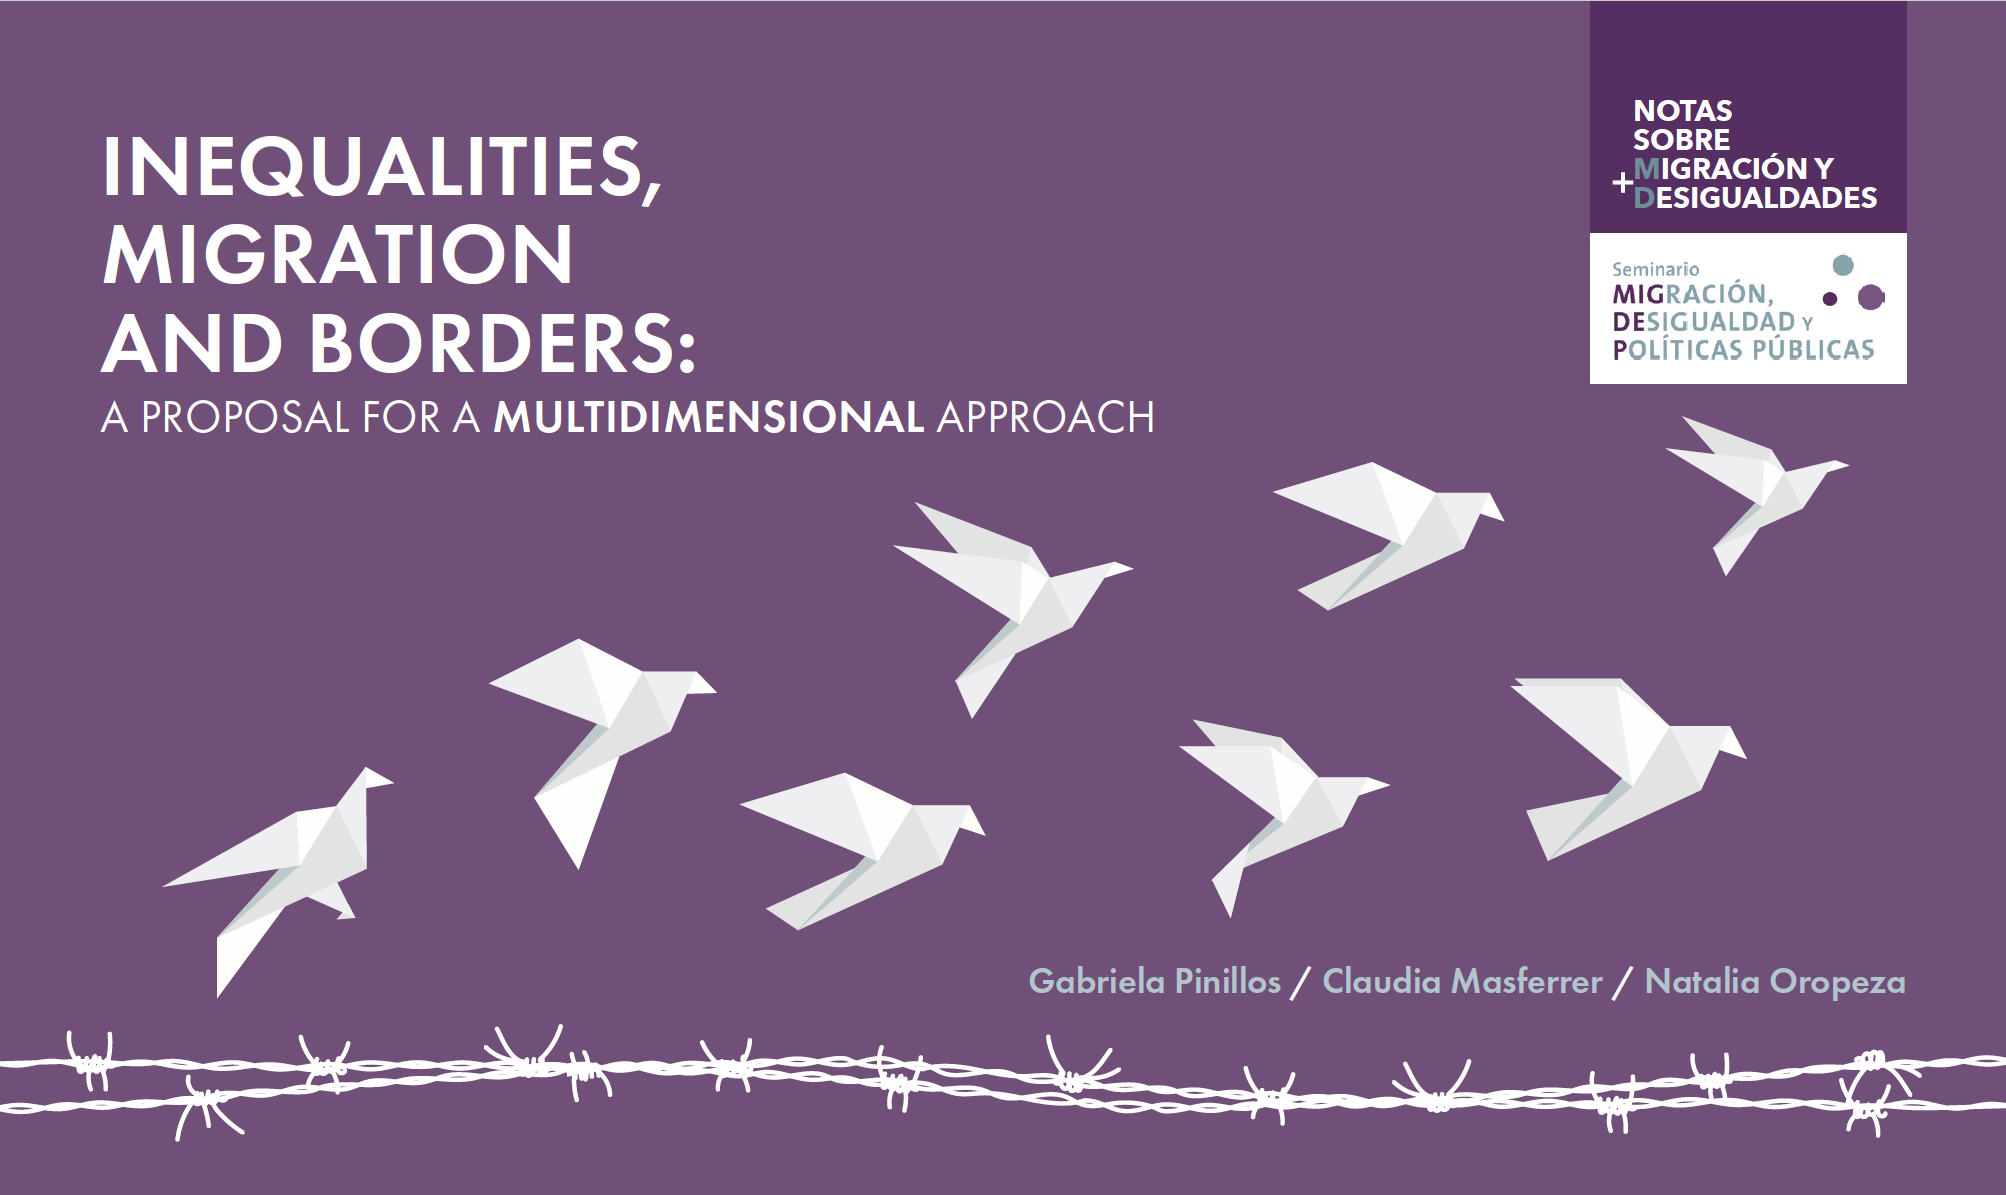 Inequalities, Migration and Borders: A proposal from a multidimensional approach